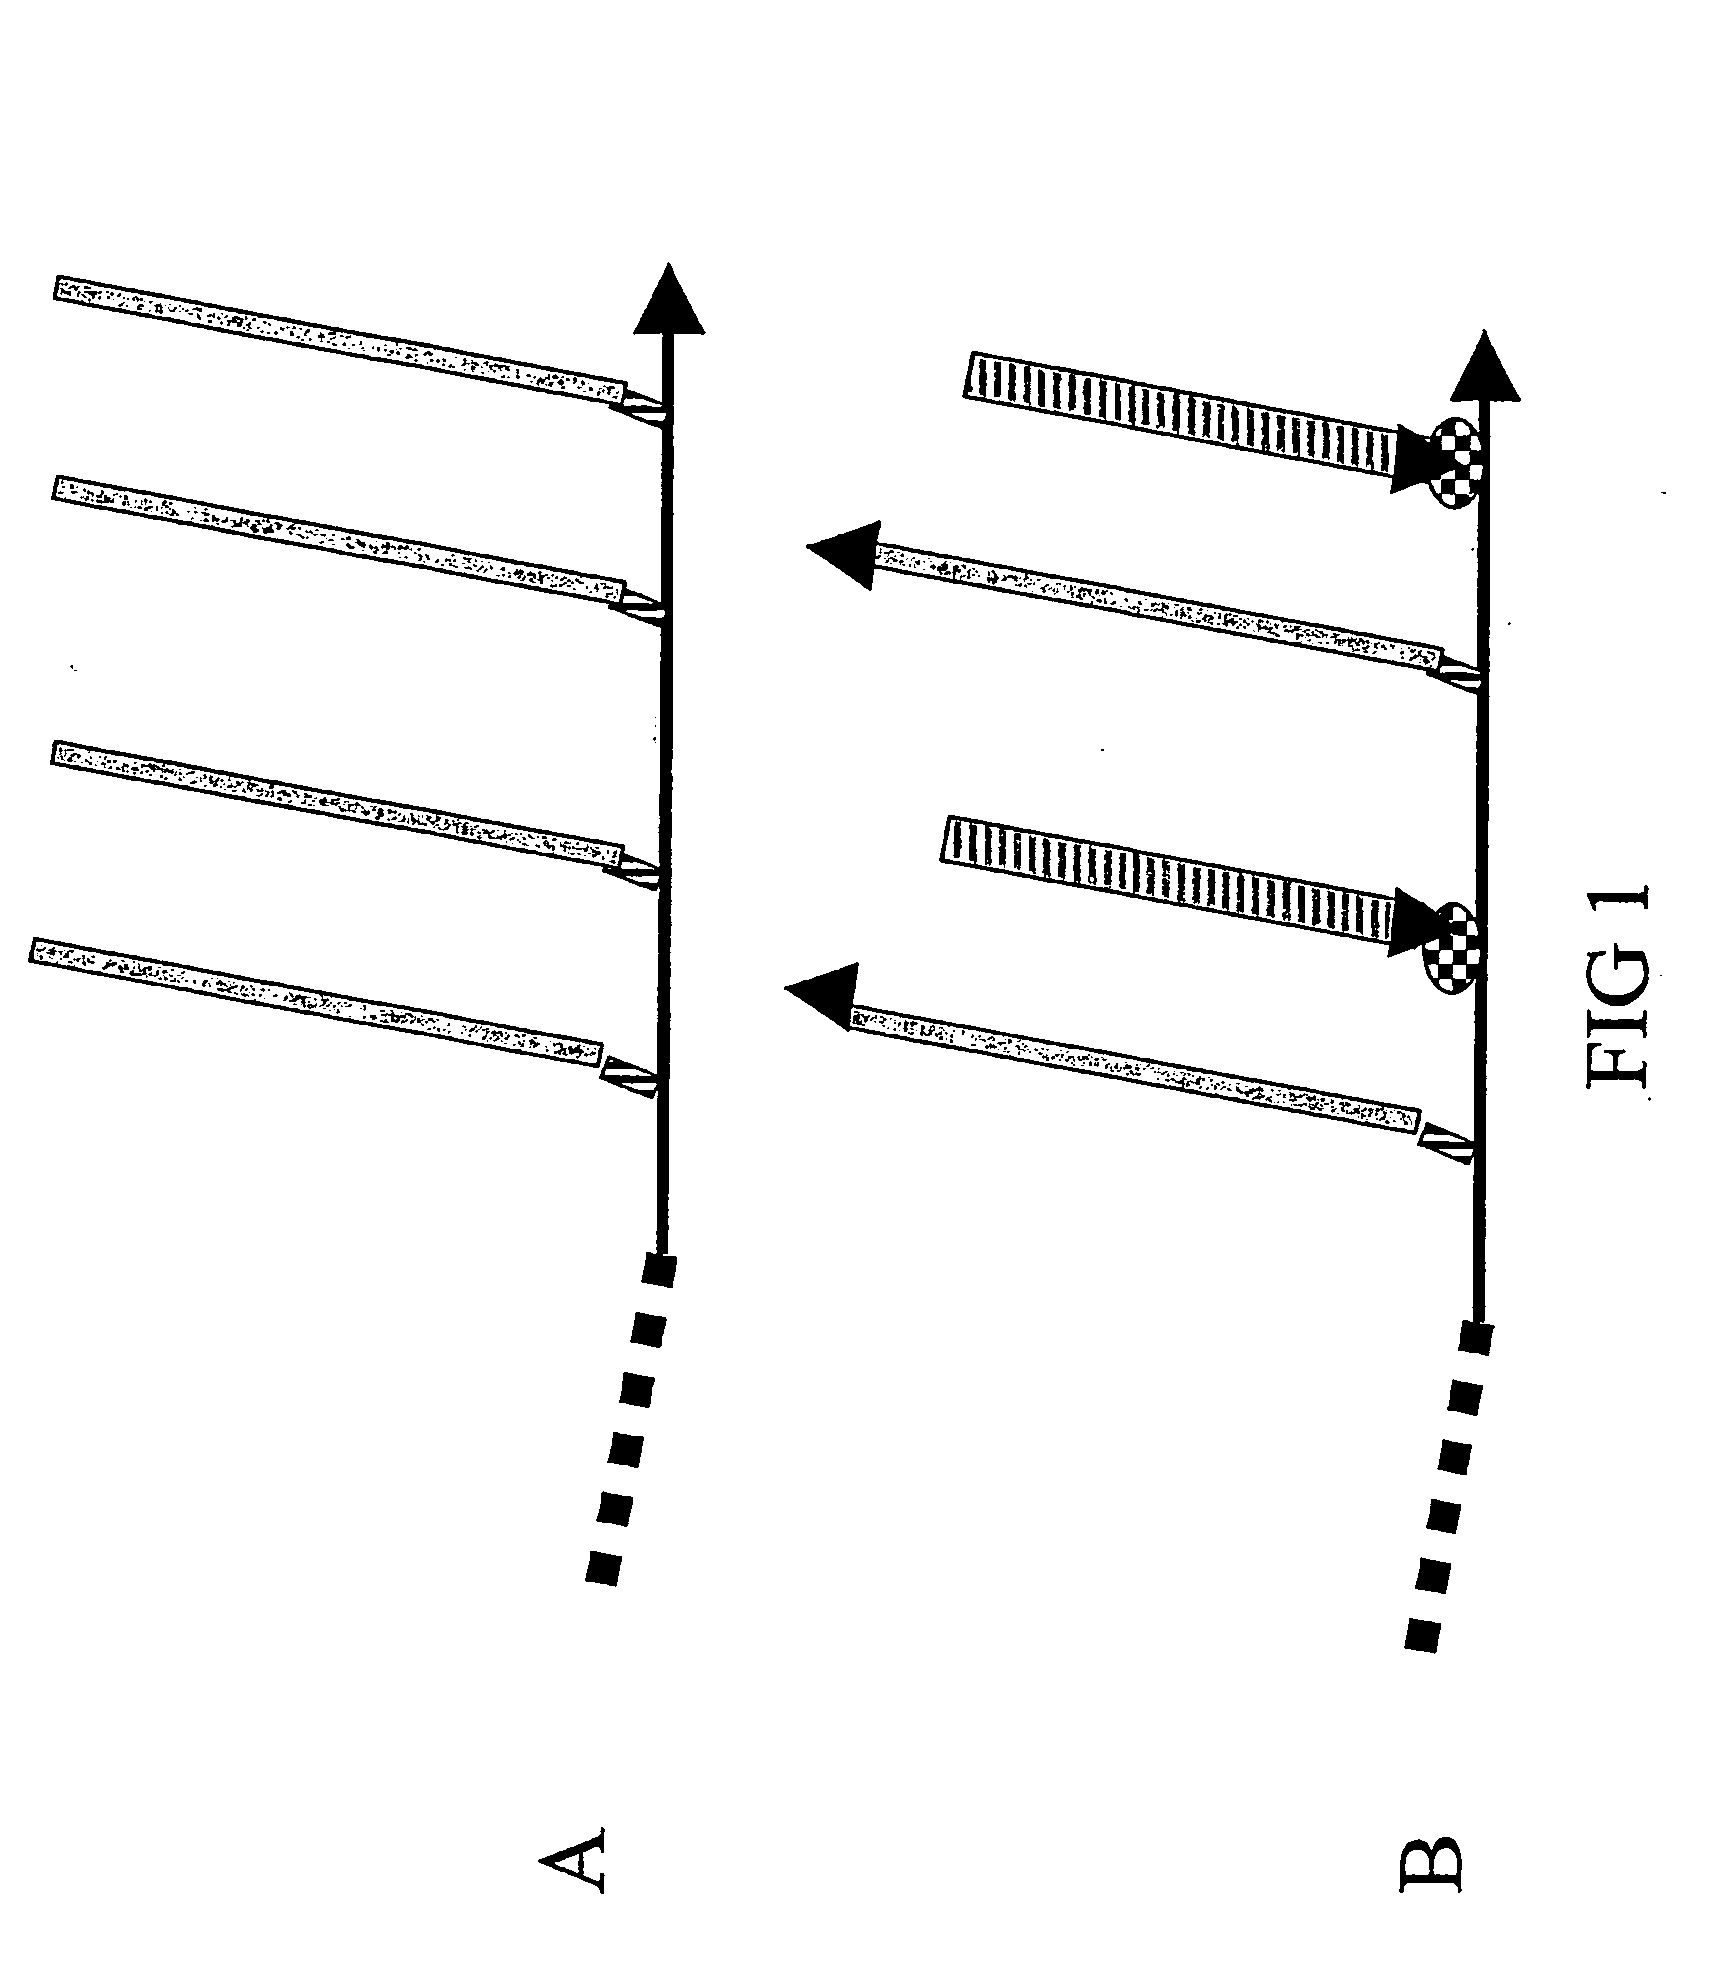 Composite peptide compounds for diagnosis and treatment of diseases caused by prion proteins